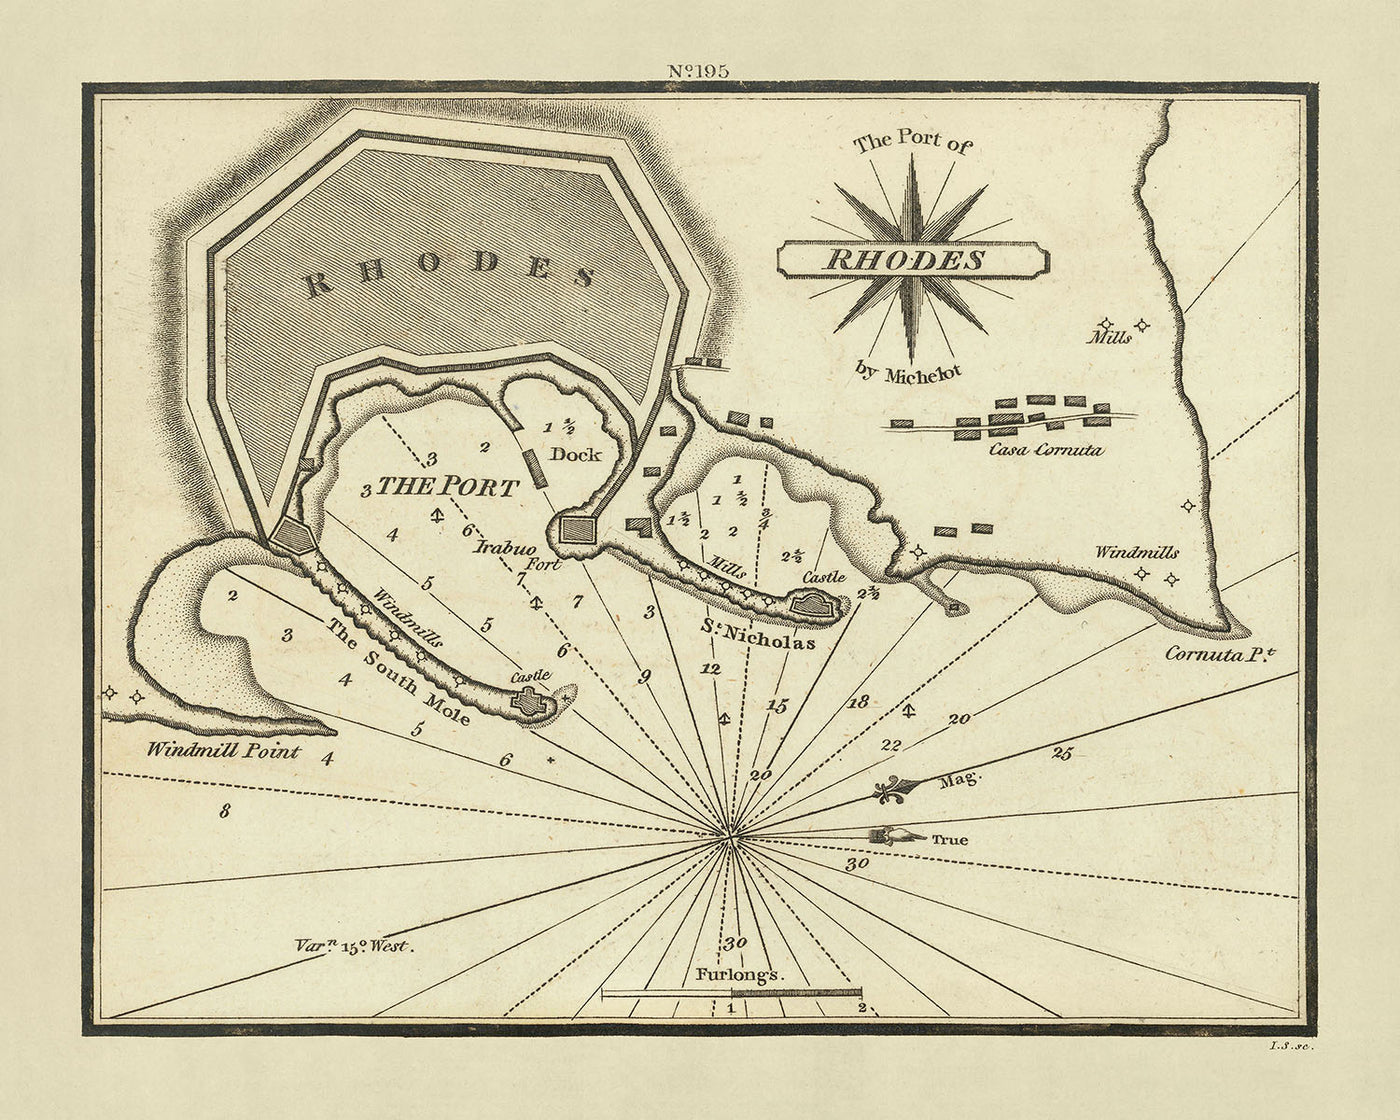 Old Port of Rhodes Nautical Chart by Heather, 1802: Soundings, Anchorages, Fortified City